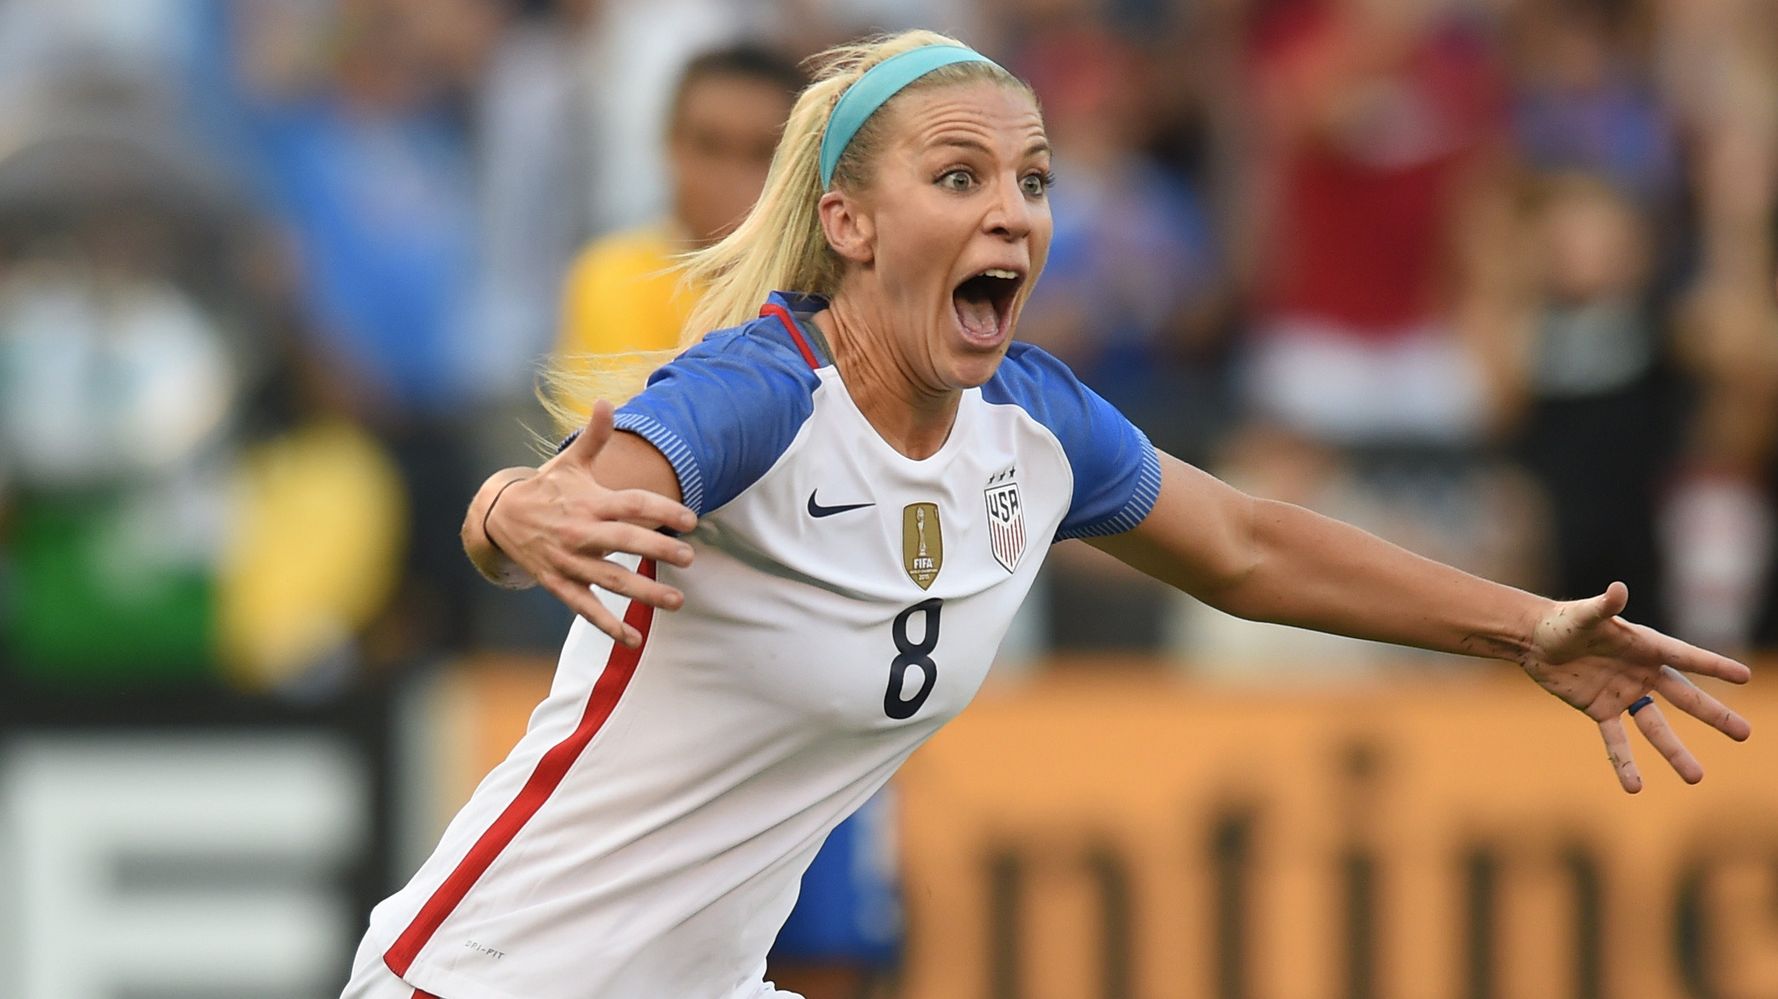 Watch U.S. Women's Soccer Pull Off Jaw-Dropping Comeback Over Brazil 